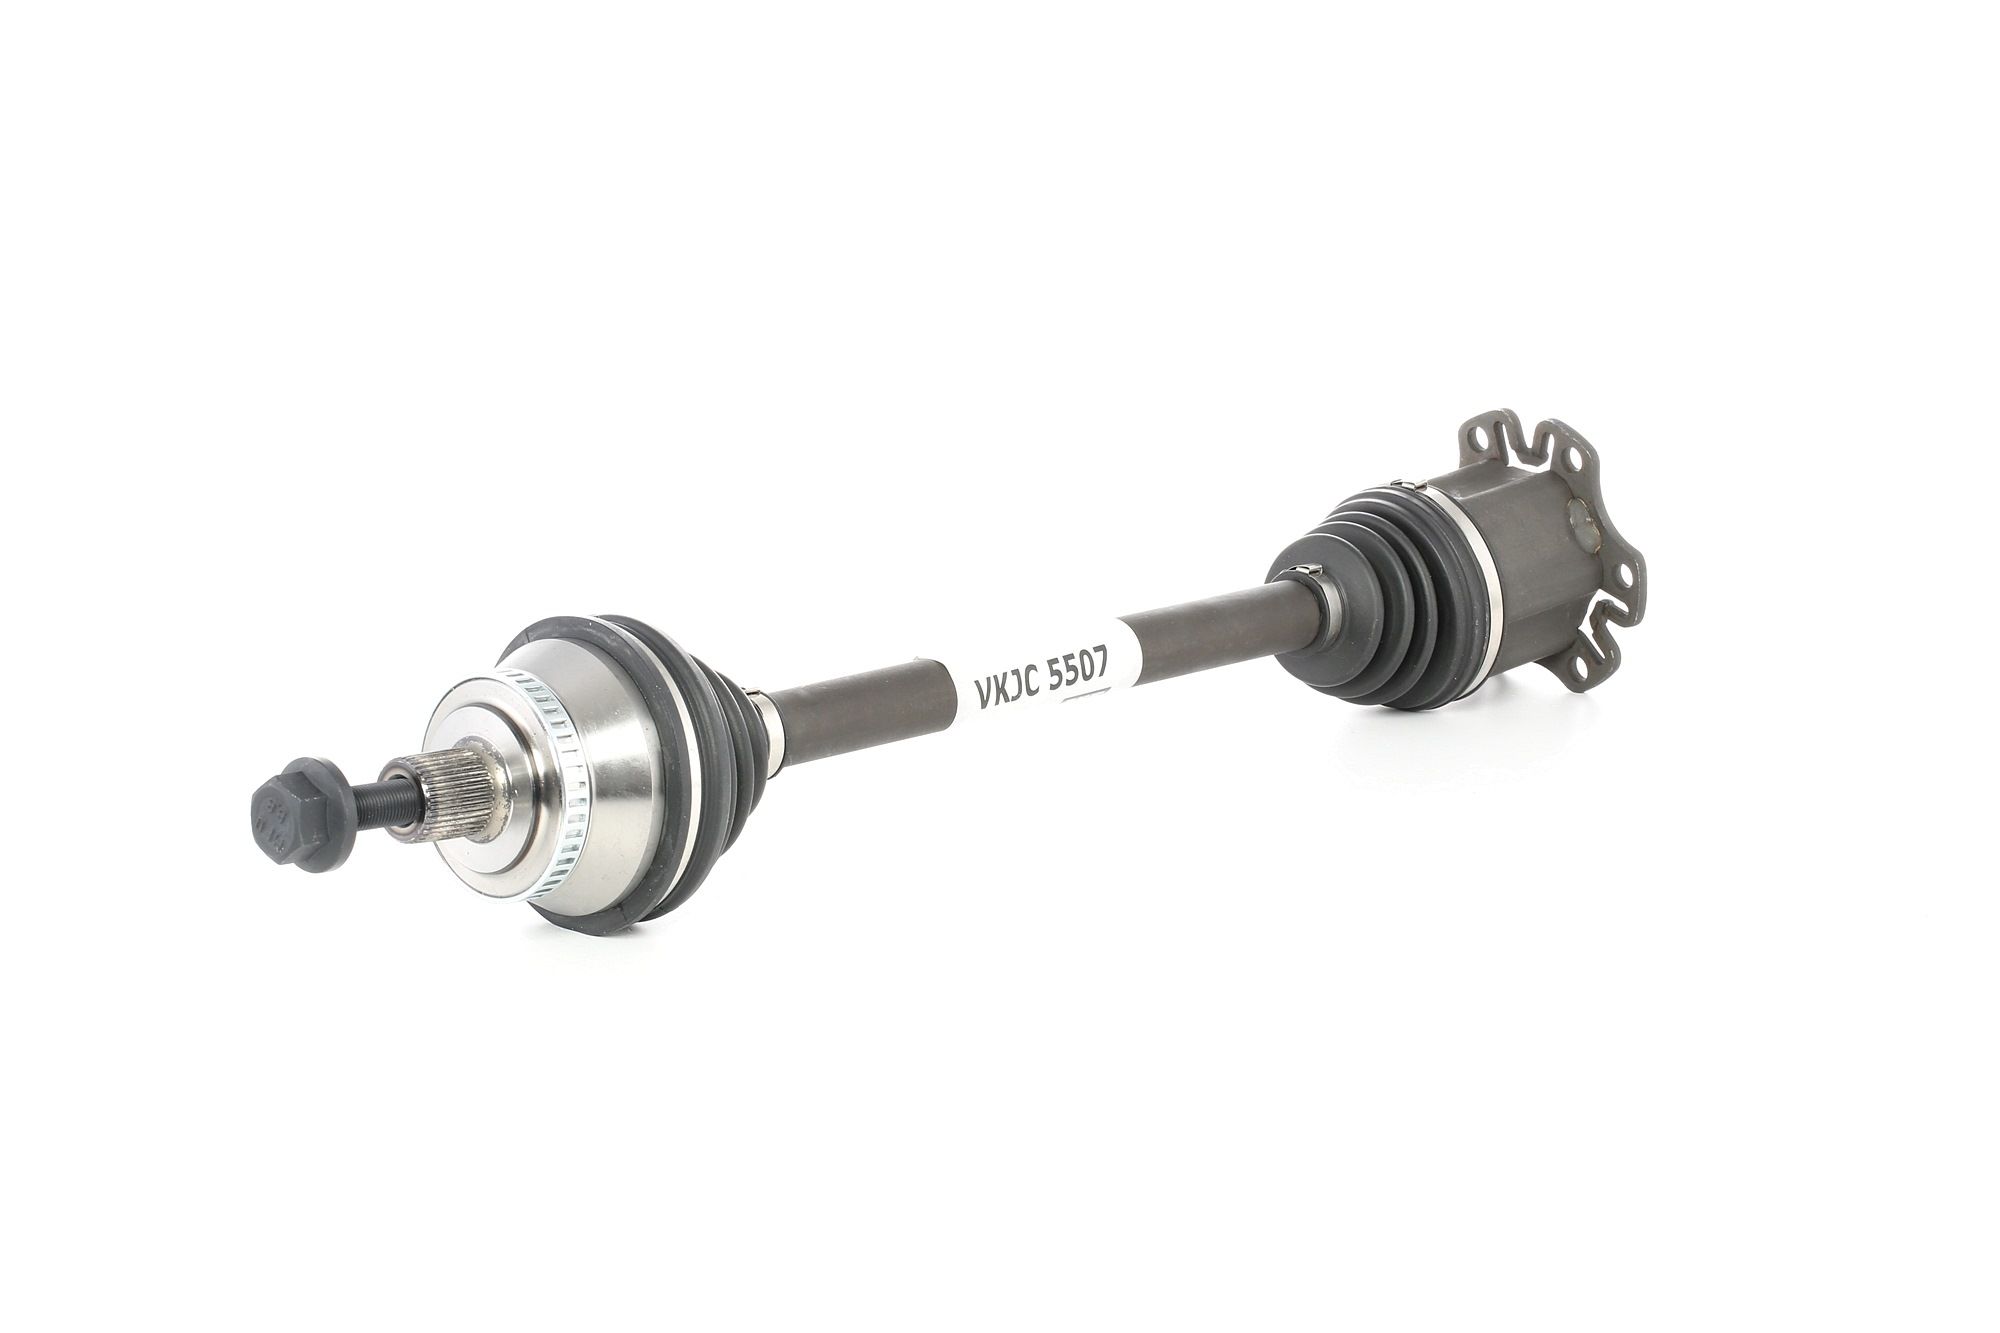 Drive Shaft SKF VKJC 5507 - Drive shaft and cv joint spare parts order